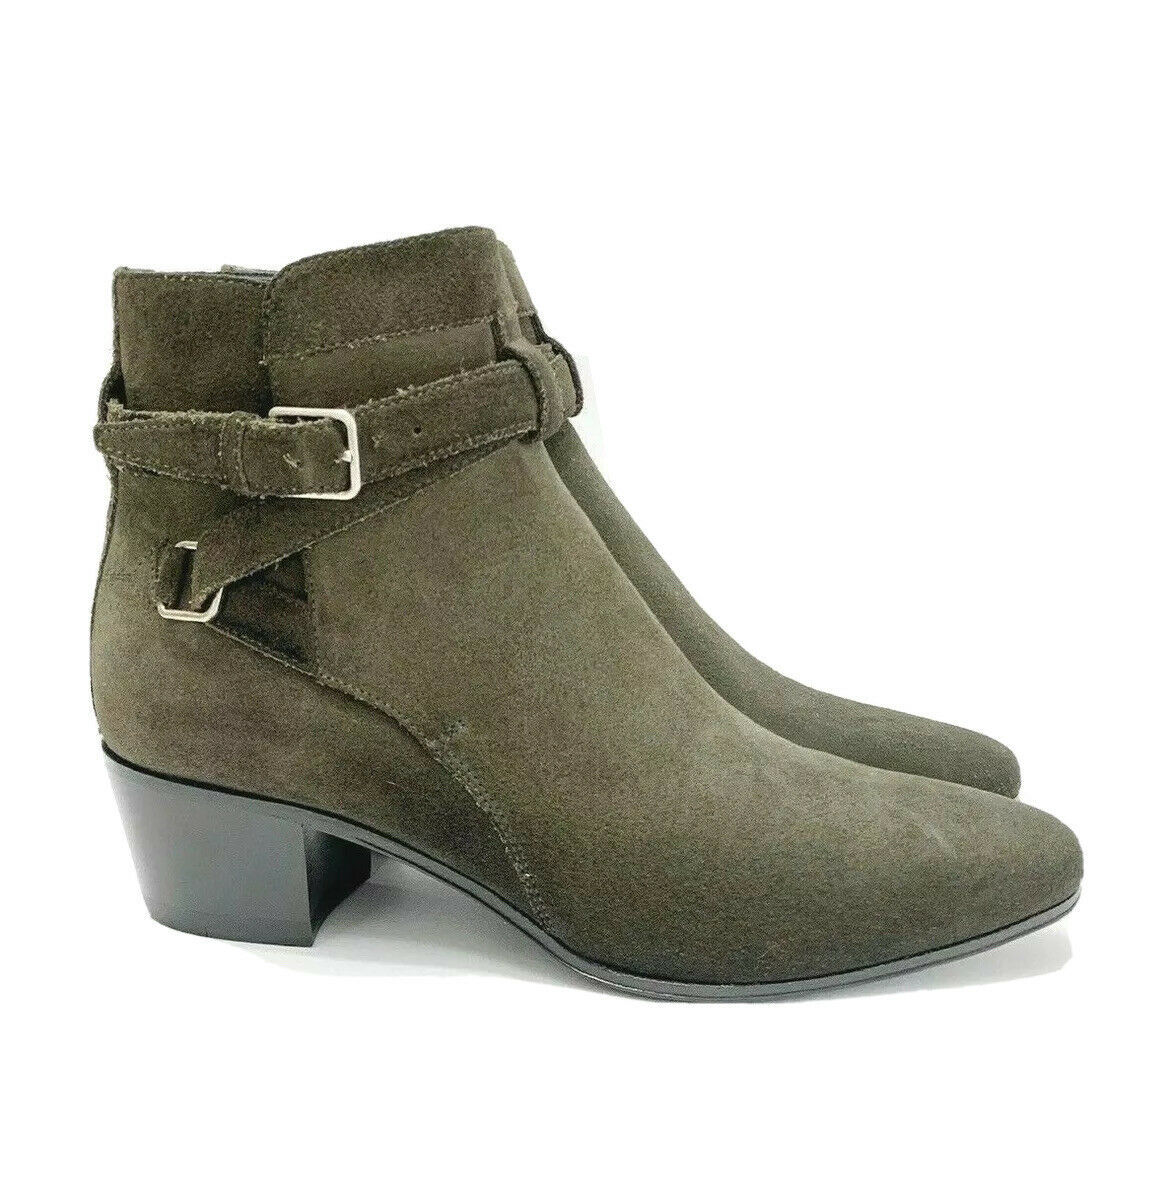 Y-1457TBD New Saint Laurent Hunting Green Suede Ankle Boots Size 37.5 7 ...